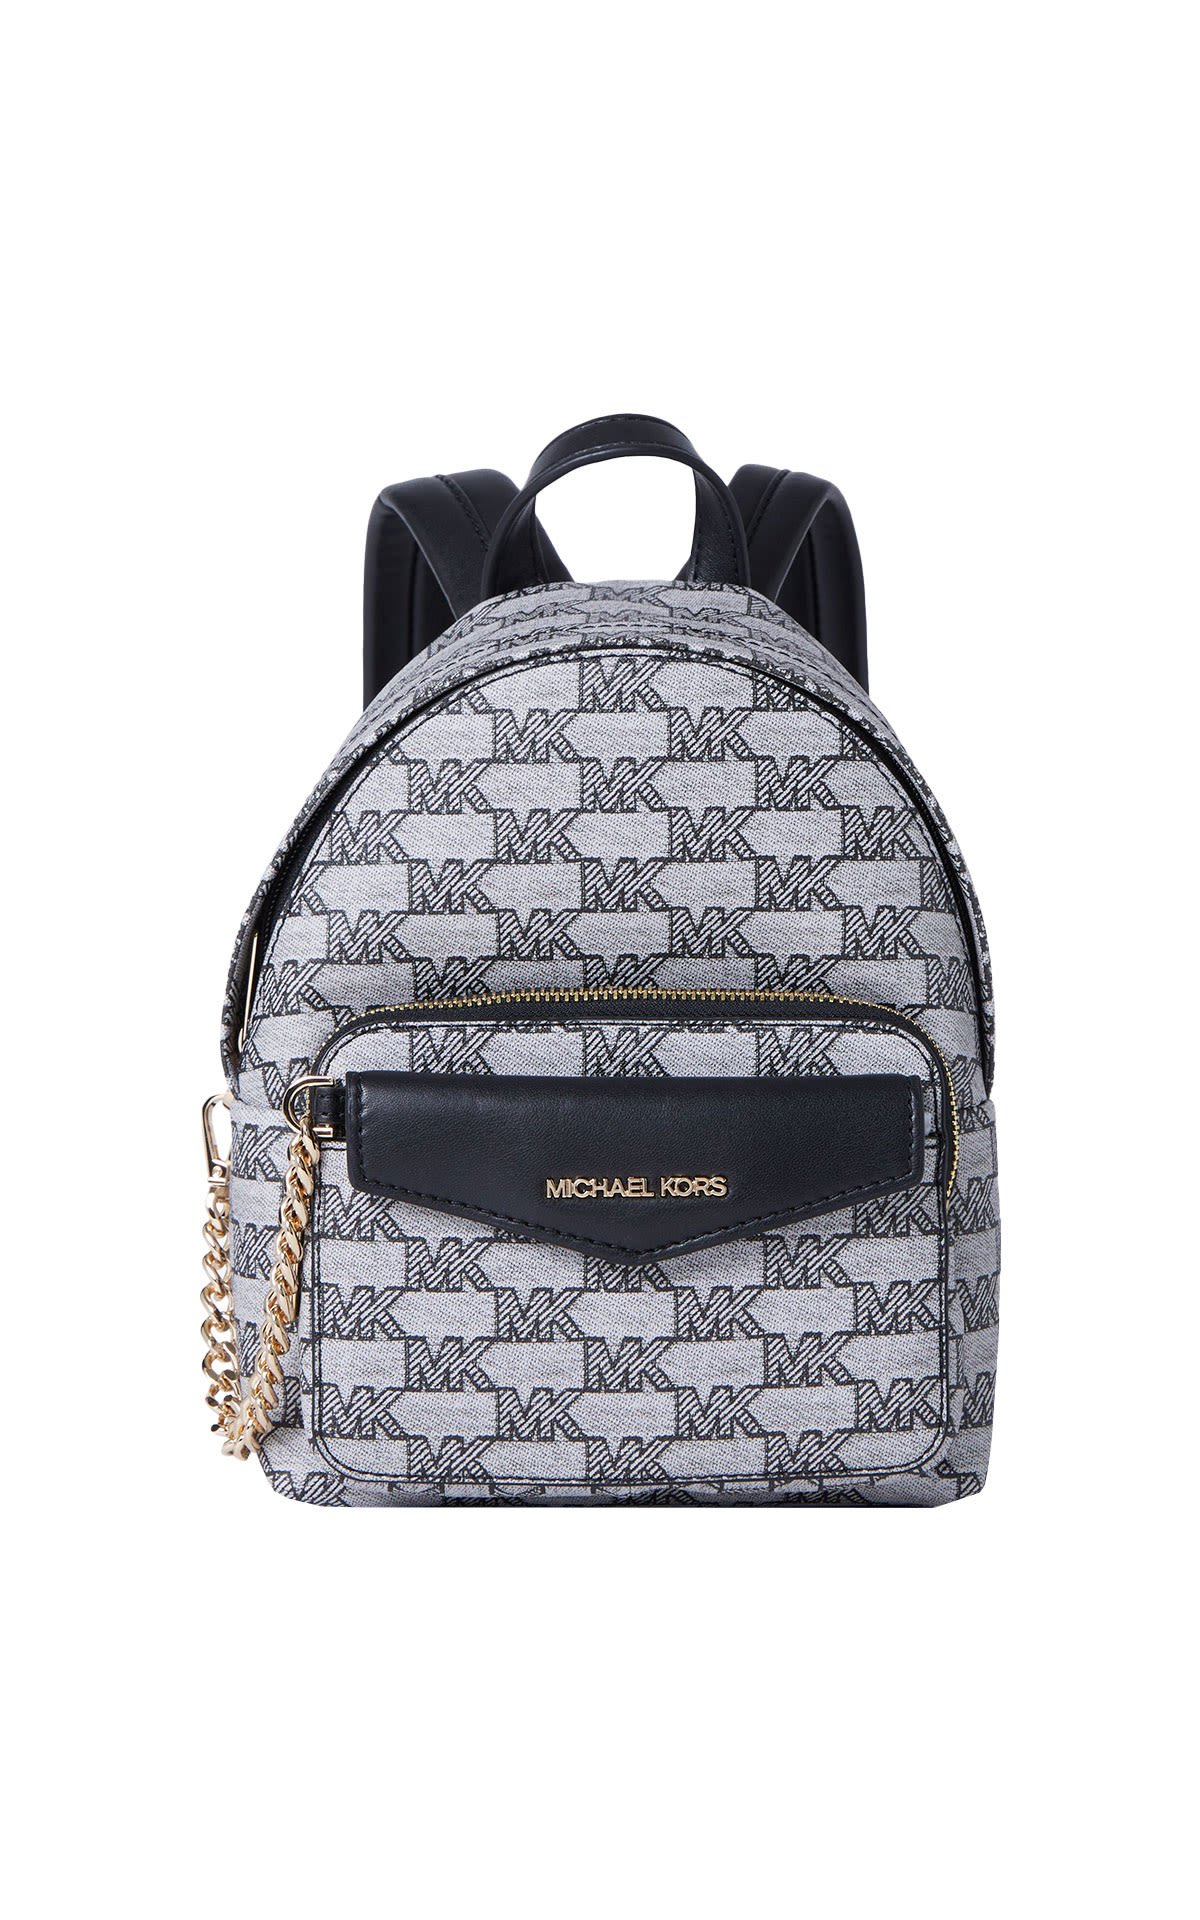 Blue backpack with brand logo Michael Kors